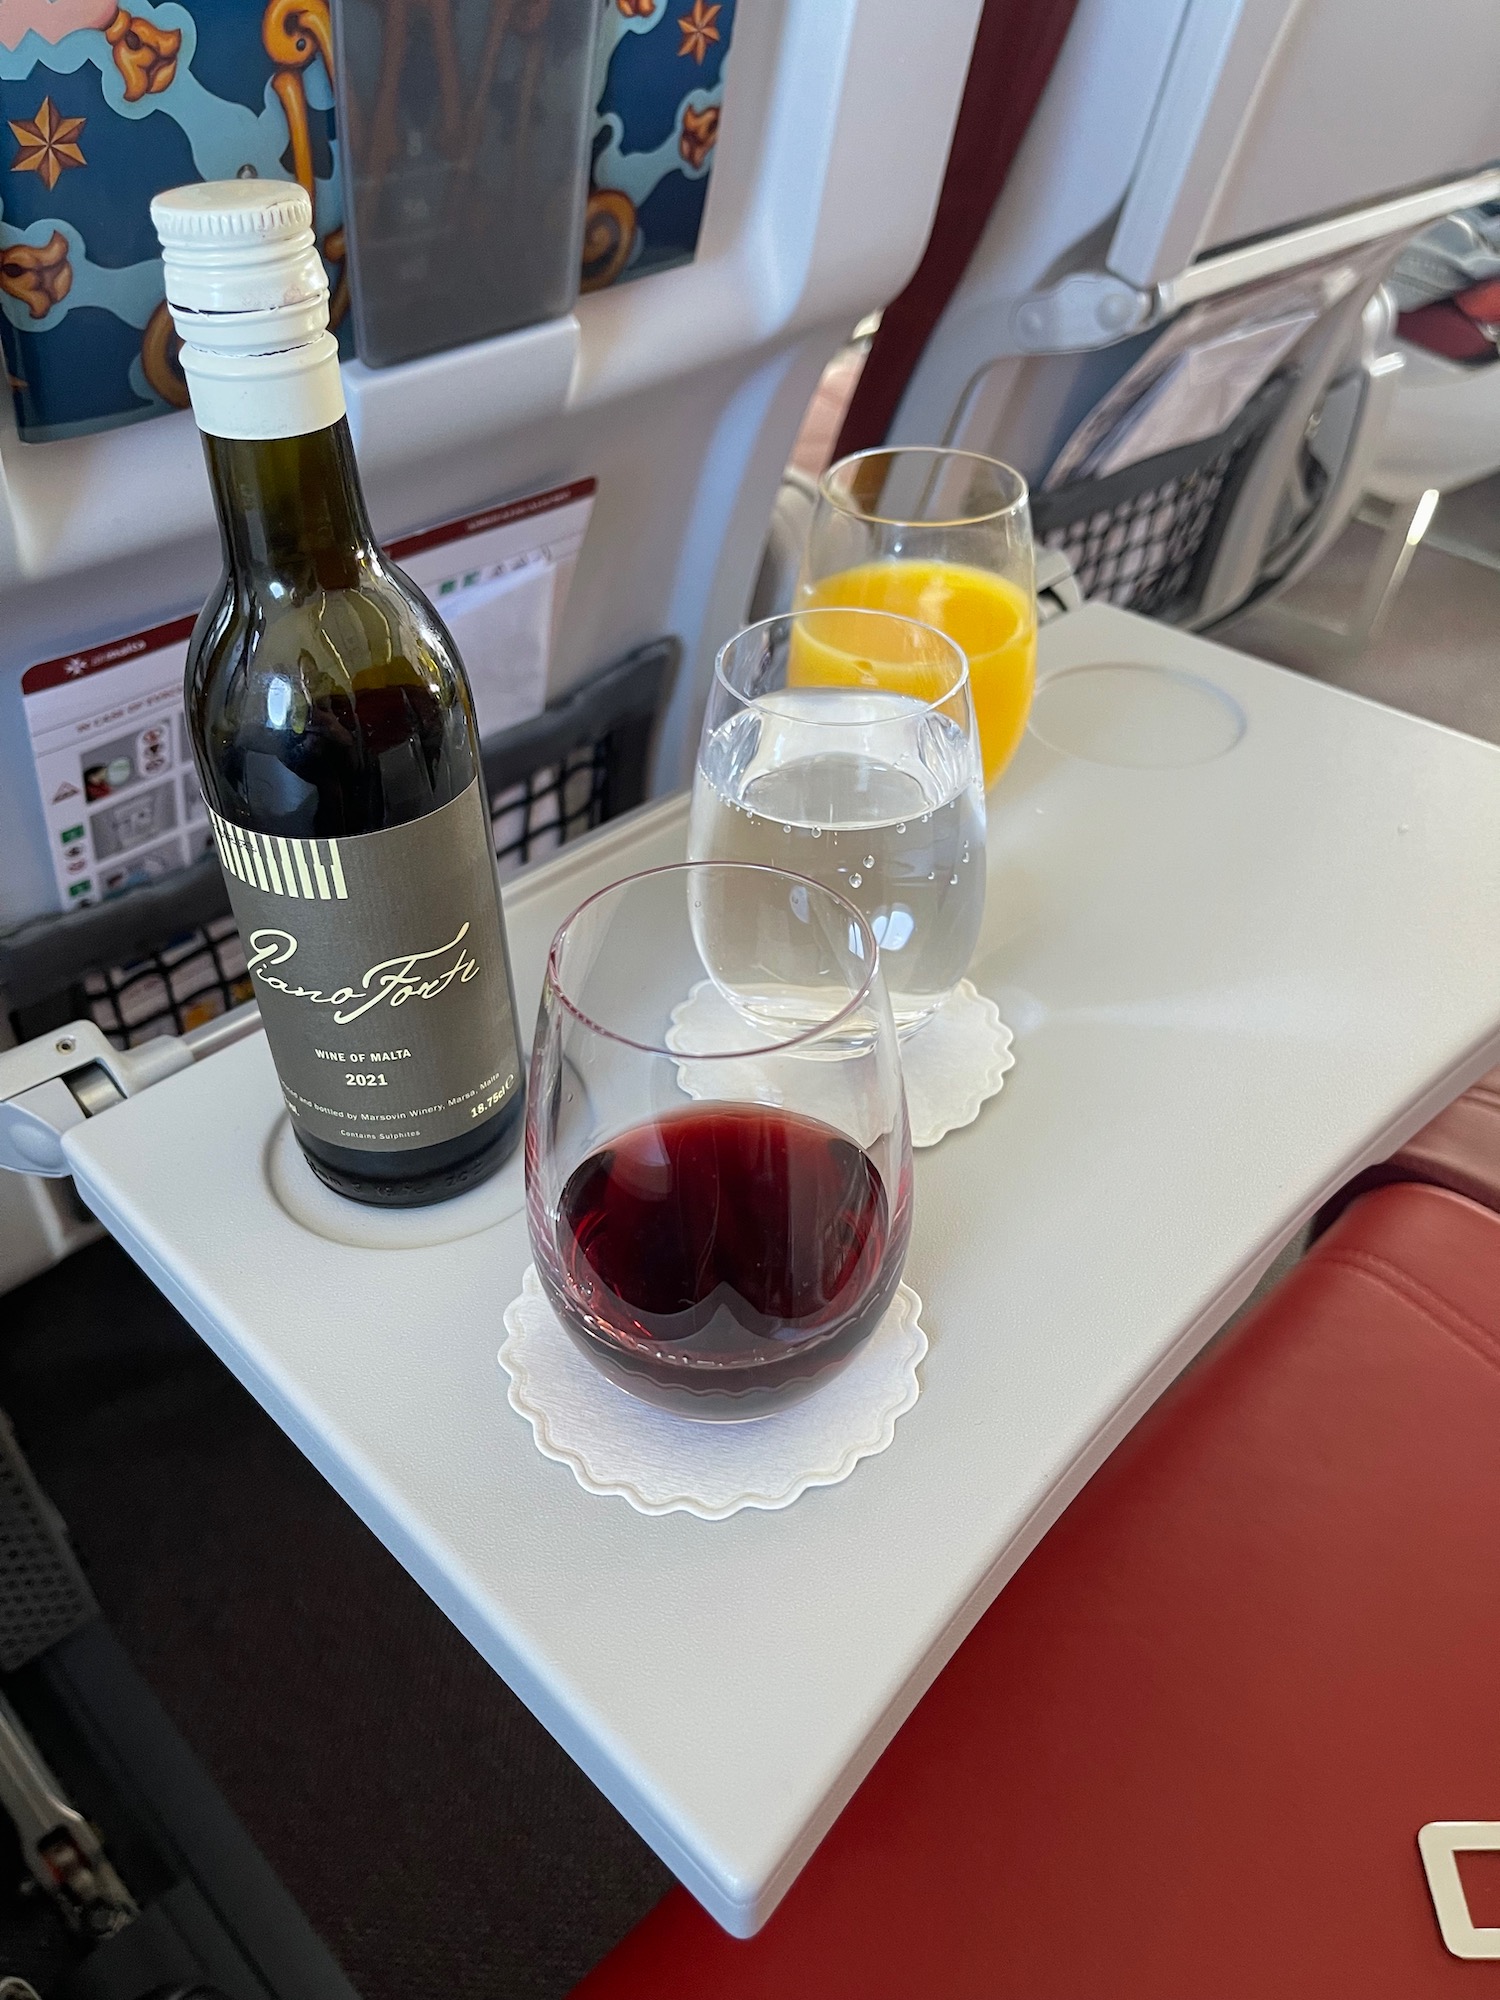 a wine bottle and glasses on a tray